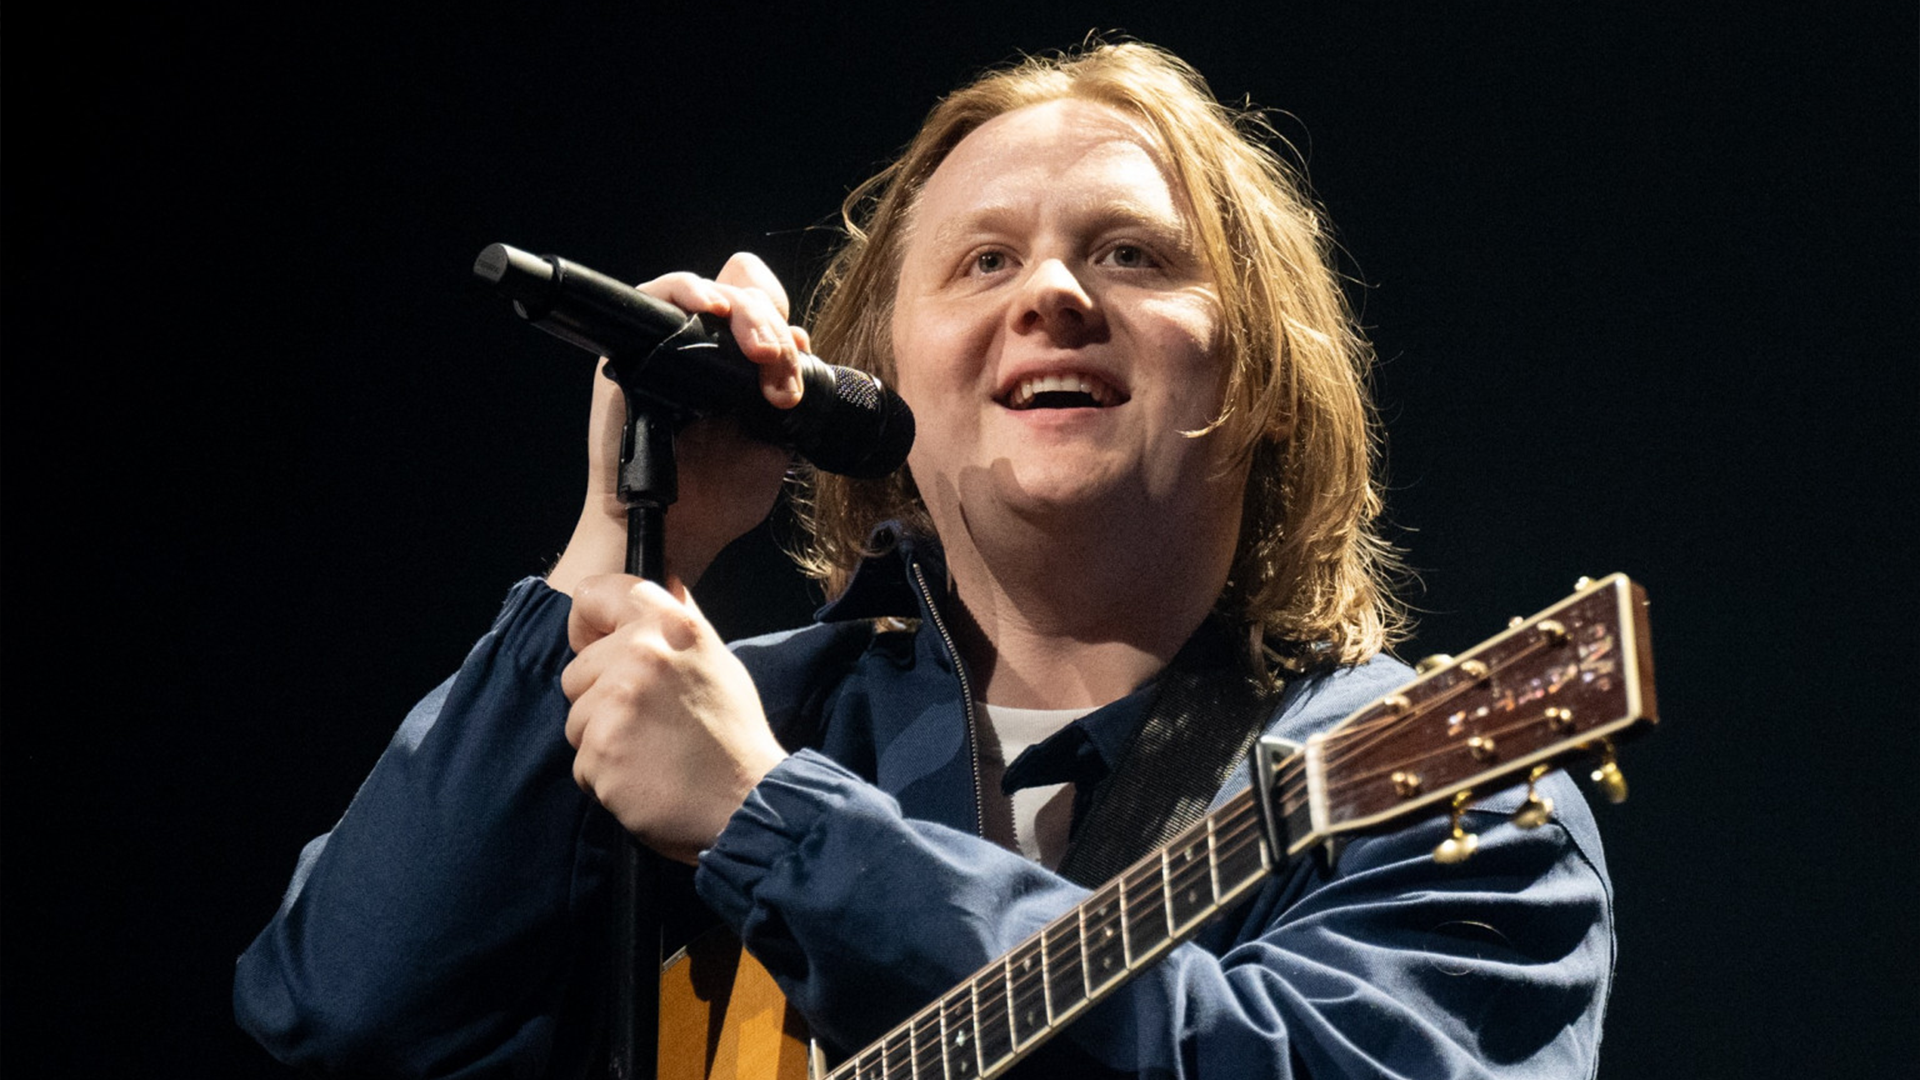 Lewis Capaldi: albums, songs, playlists